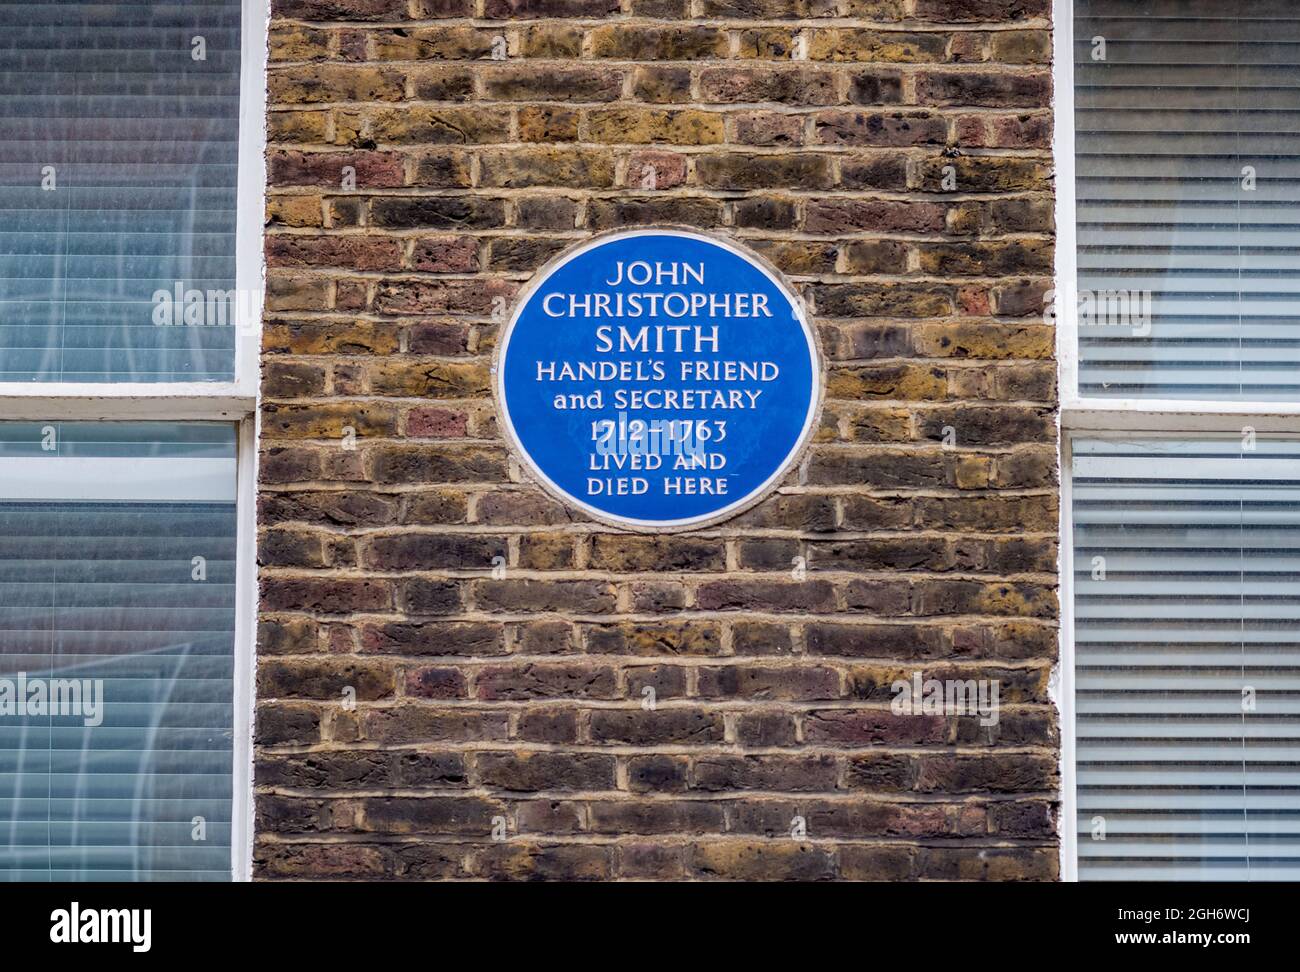 John Christopher Smith Blue Plaque 6 Carlisle Street, Soho London - John Christopher Smith Handel's friend and secretary 1712-1763 lived and died here. Stock Photo